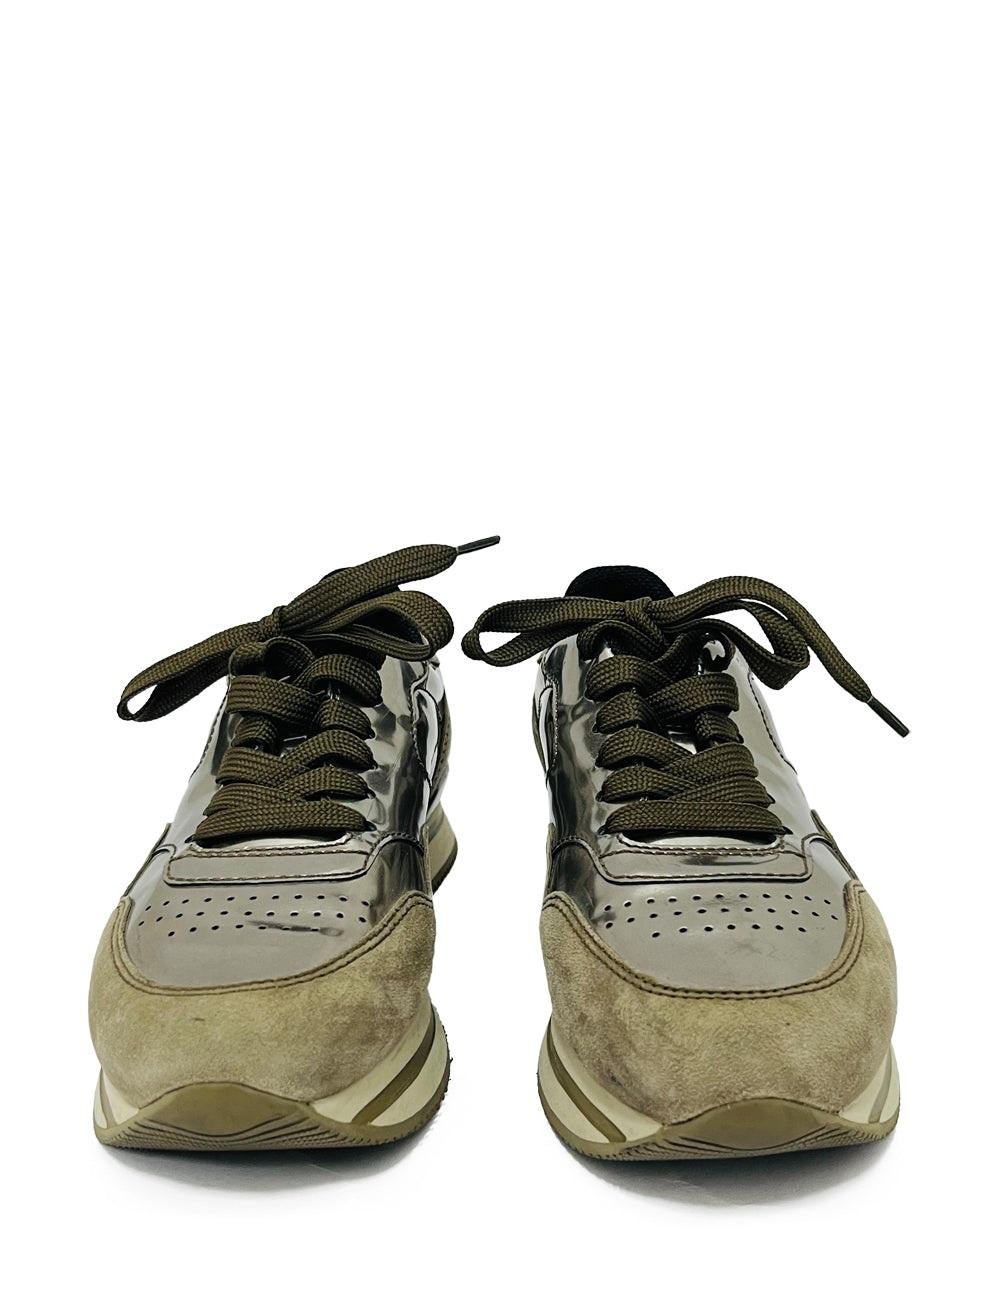 Hogan grey metallic patent leather sneakers with suede detail. In excellent condition.

Additional information:
Material: Suede
Size: EU 37
Overall Condition: Excellent 
Interior Condition: Signs of use
Exterior Condition: Light scratches on the